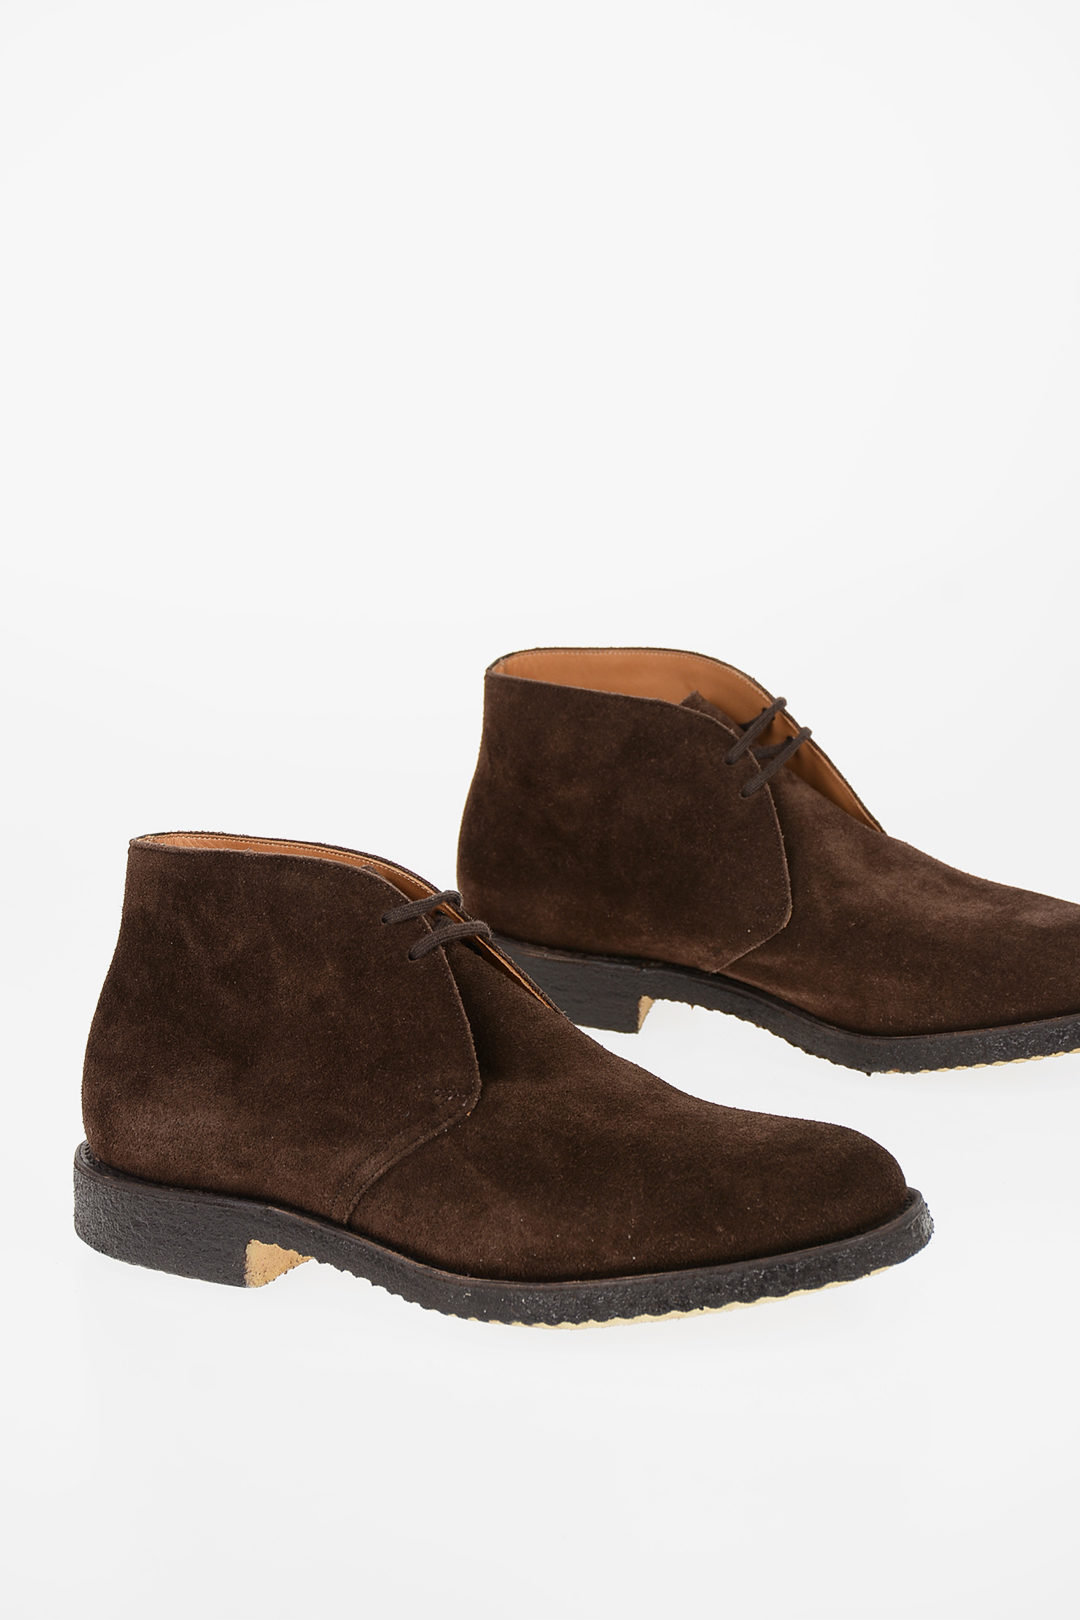 Church's Suede leather RYDER Chukka boots men - Glamood Outlet